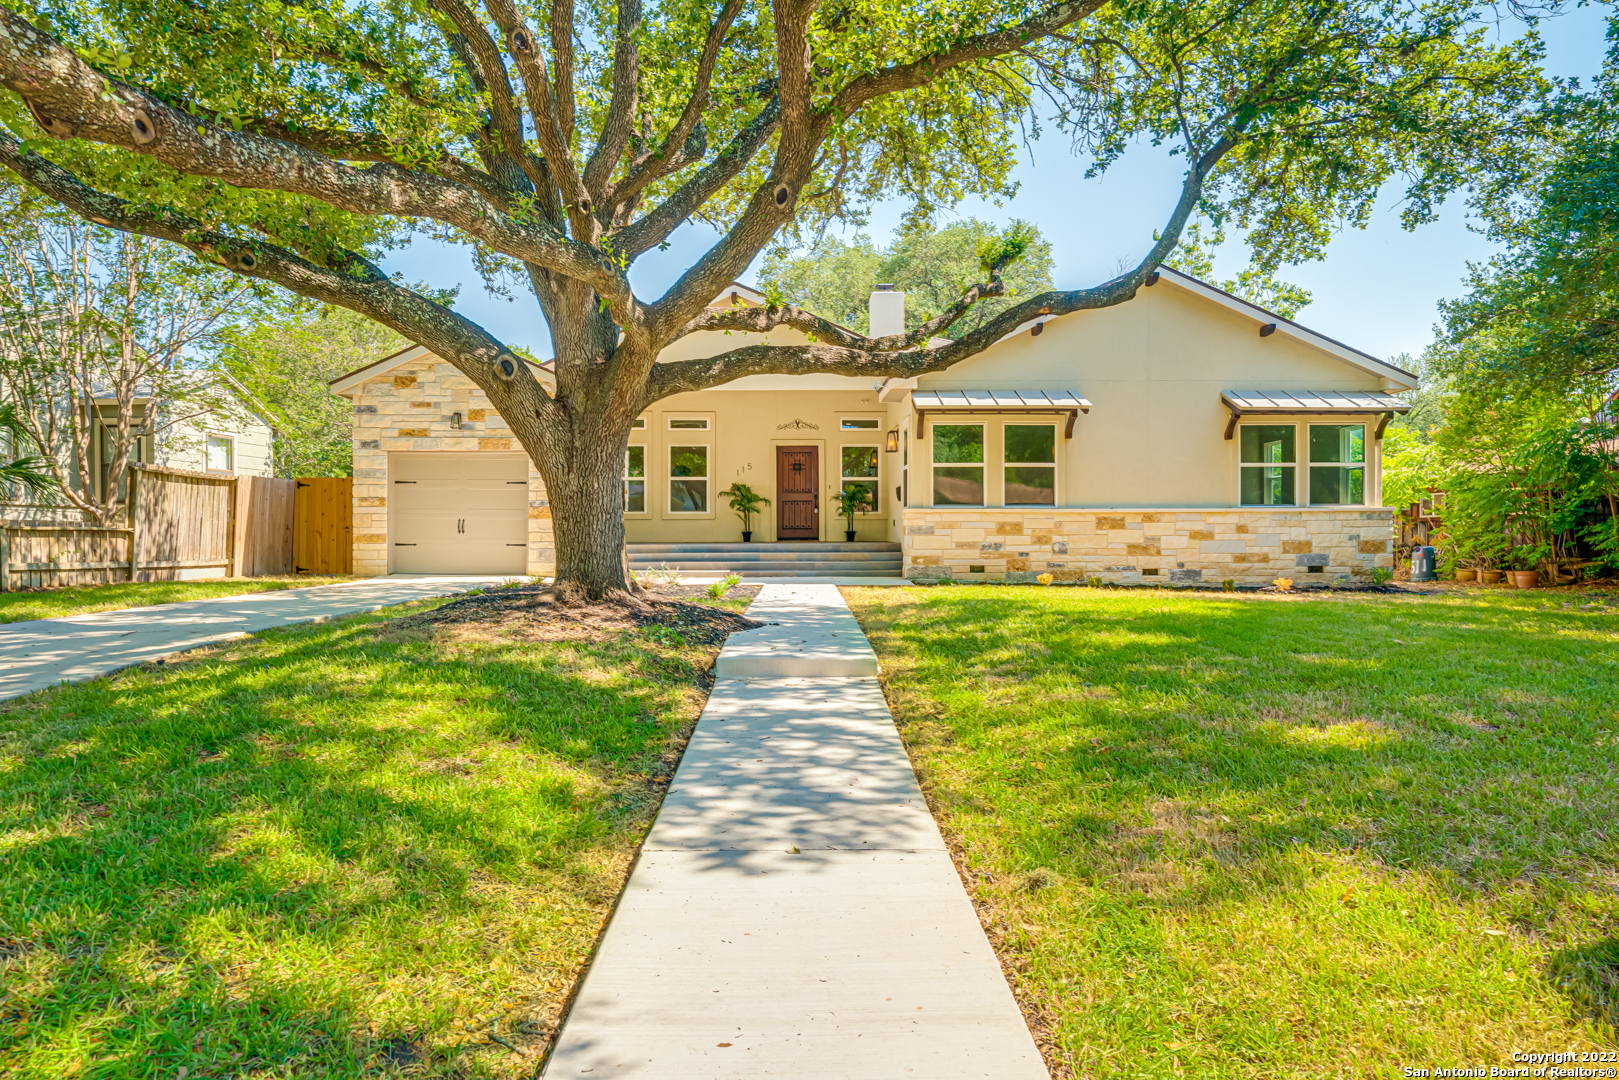 ** Open House Saturday & Sunday (7/30 & 7/31) from 12PM to 4PM** Lovely 4-bedroom, 3-bathroom home in Alamo Heights ISD! This home has been completely renovated from the ground up, with new wiring, plumbing, custom cabinets, bathrooms, nothing in this home was left untouched. Don't miss this opportunity to live in one of San Antonio's most desirable neighborhoods!